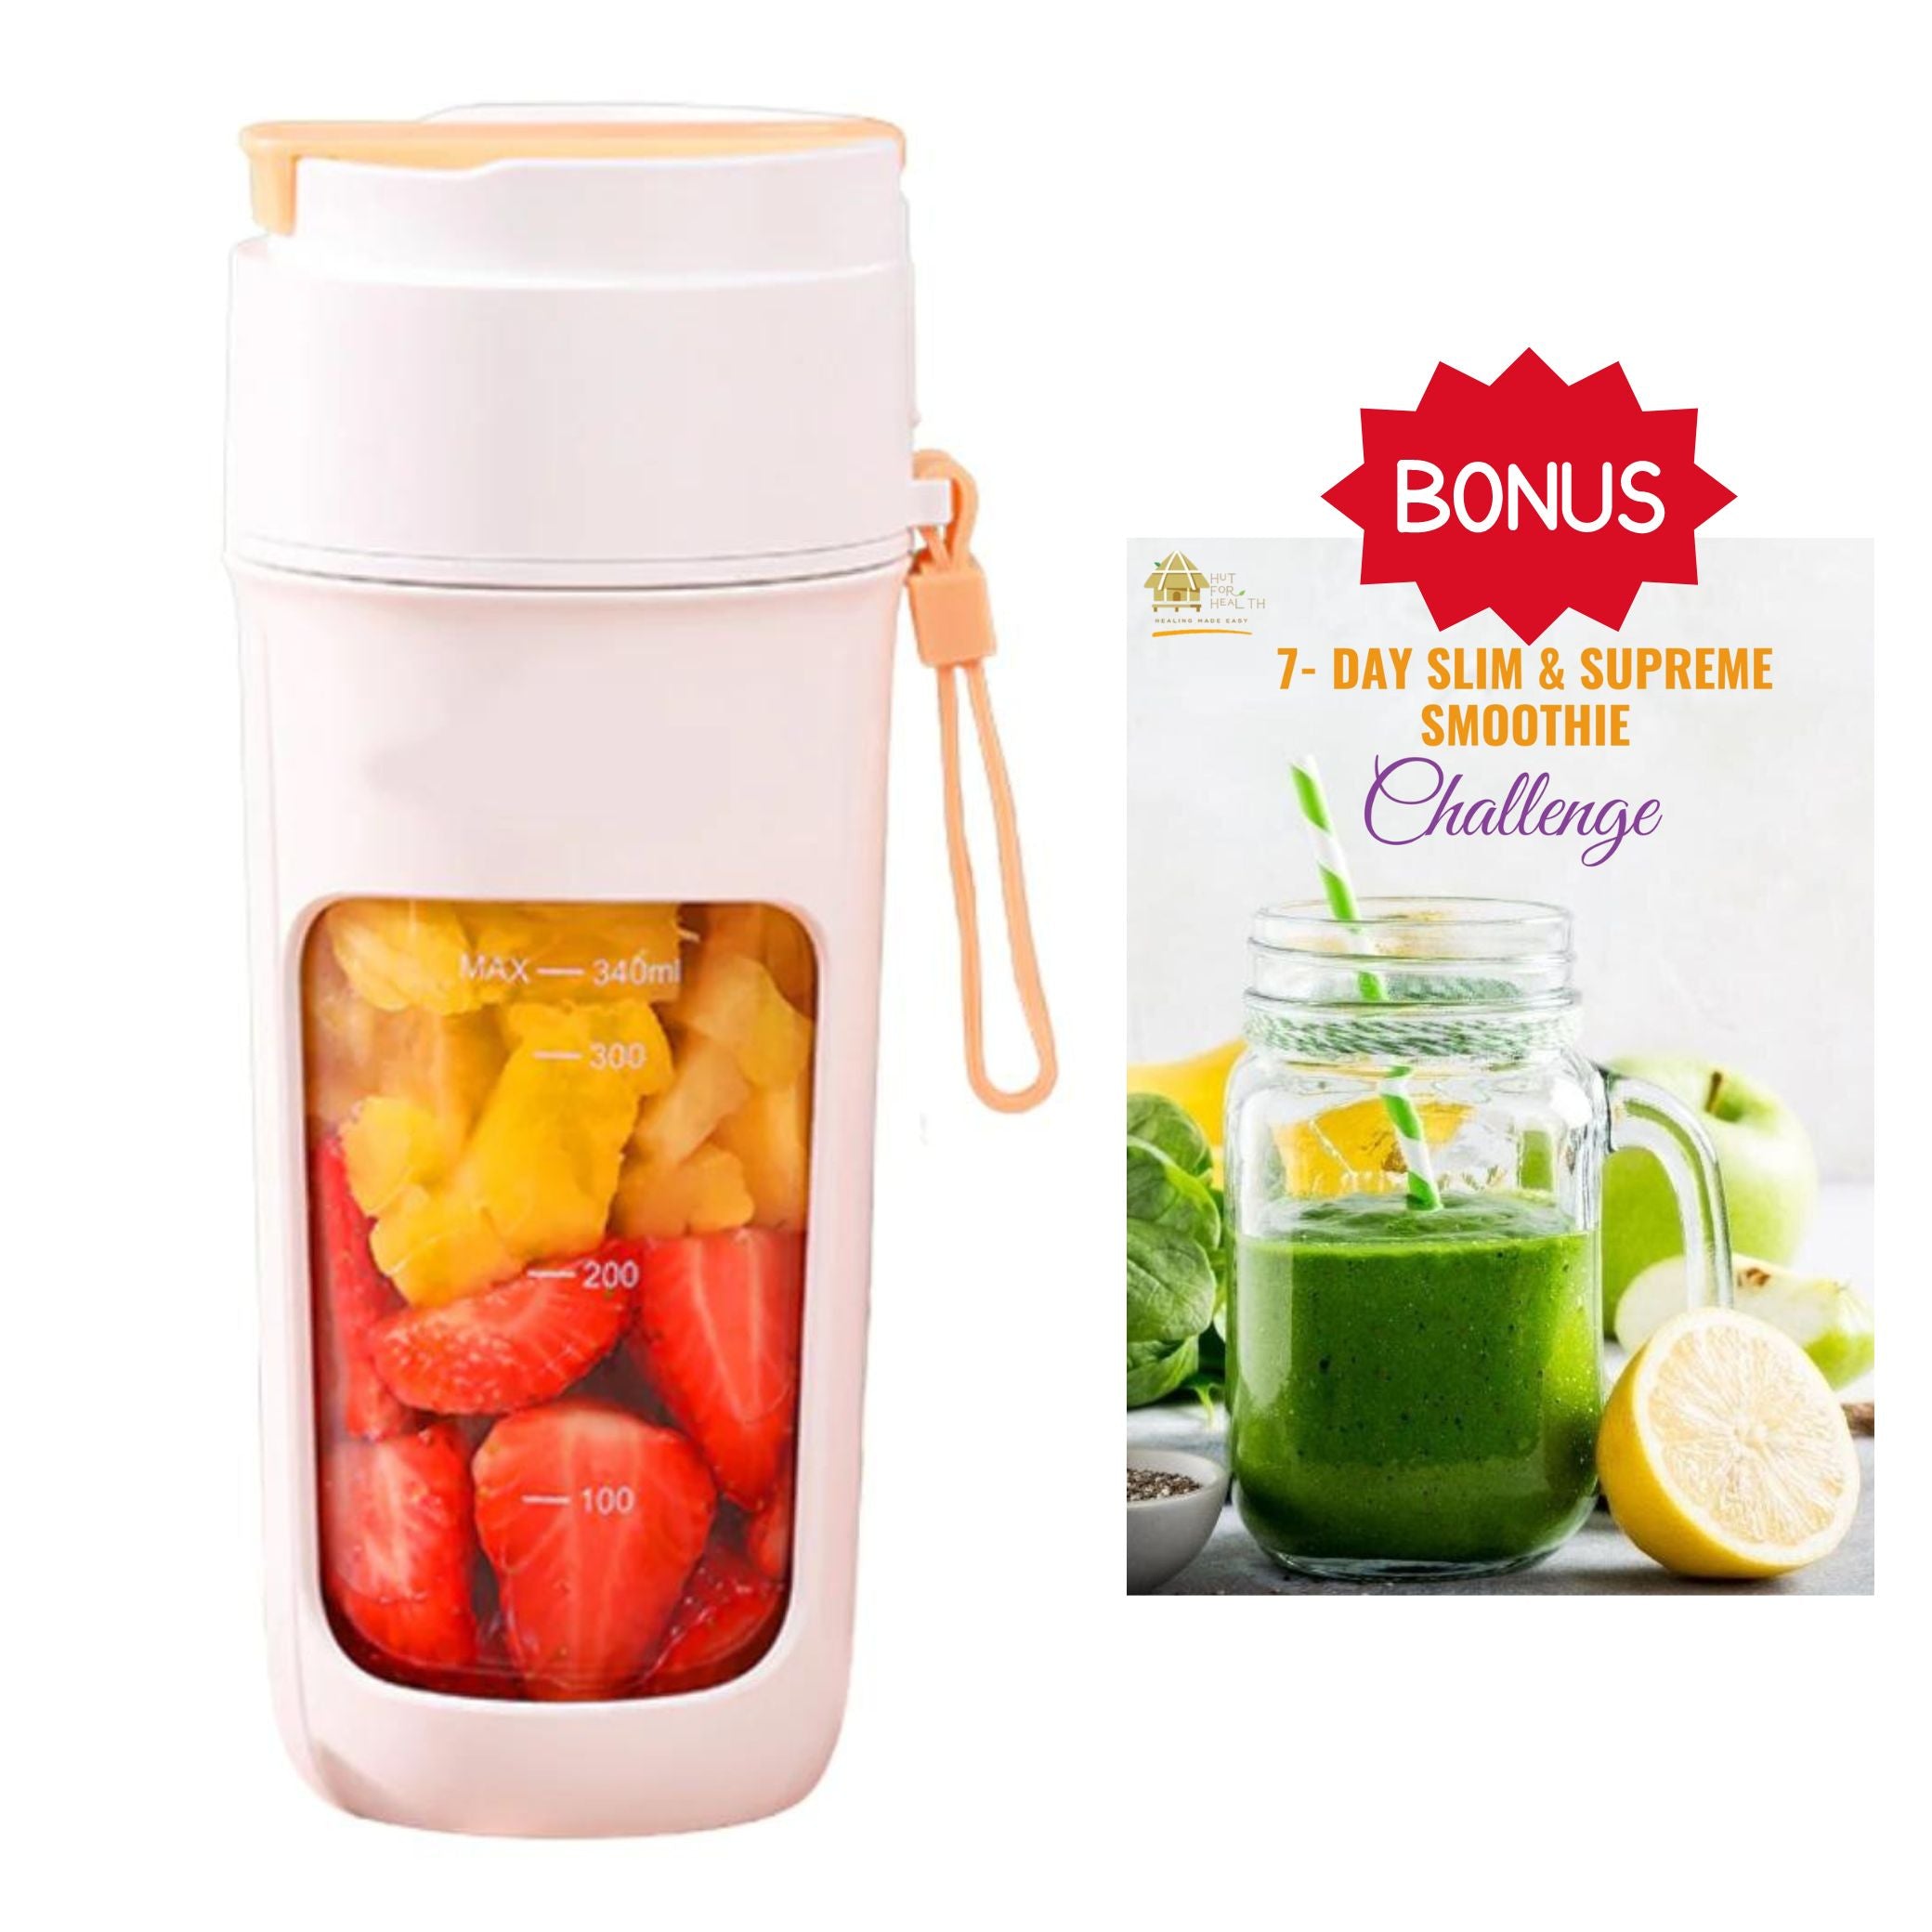 The BlendnGO- The Portable Blender That Makes Health Easy